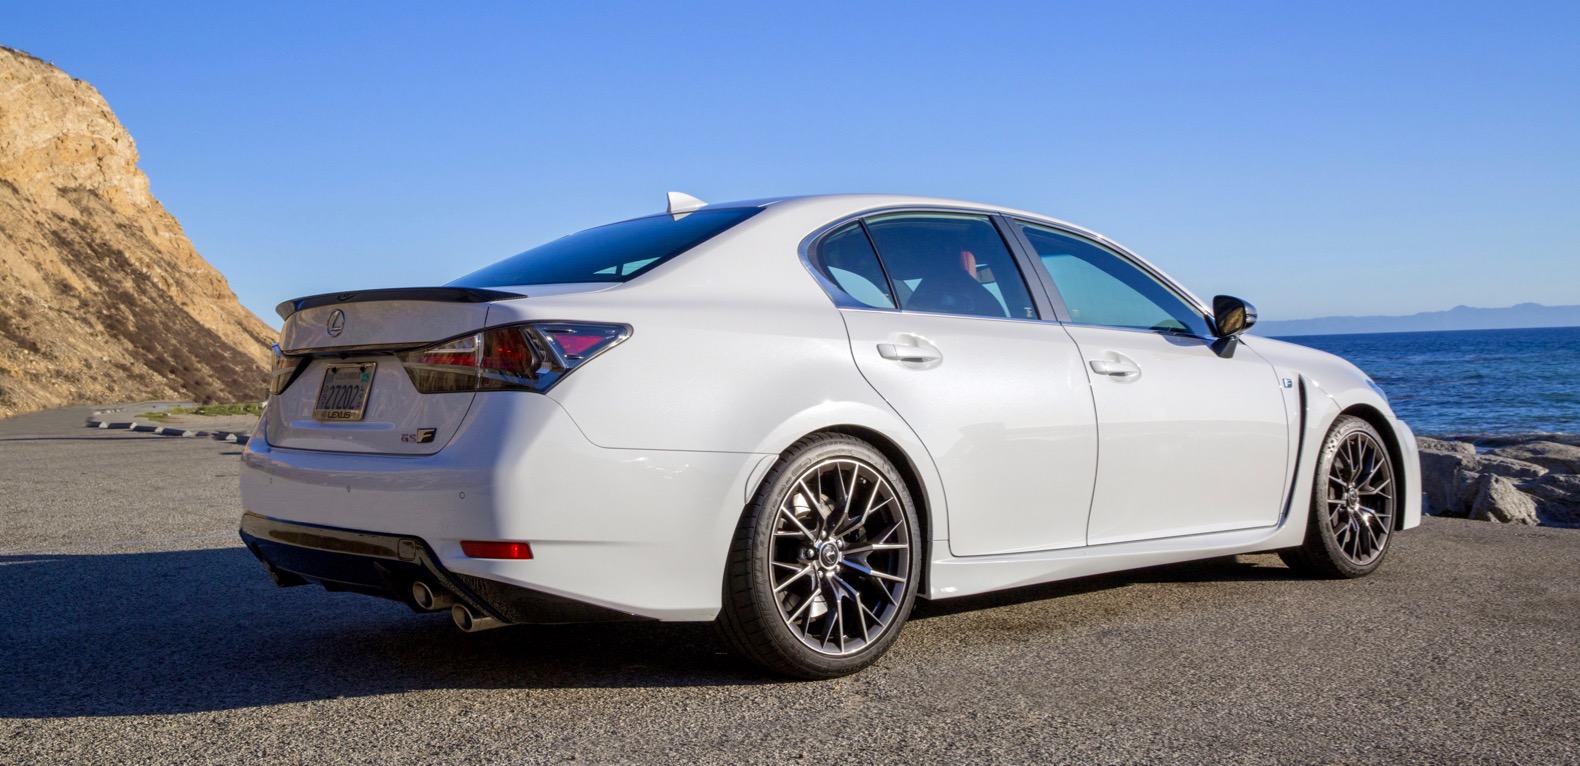 2019 Lexus GS F Review: The perfect soundtrack - The Torque Report